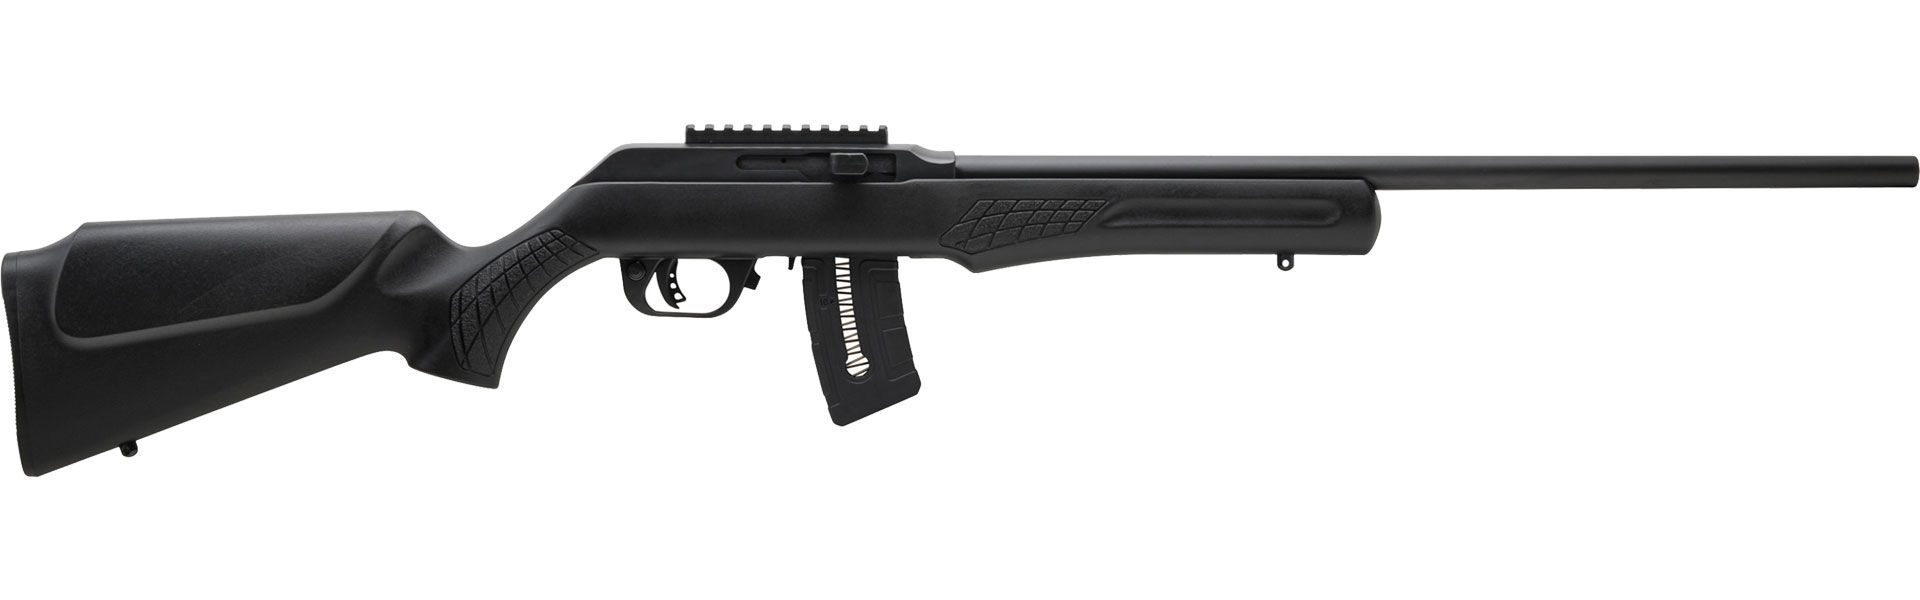 ROSSI RS22 .22LR SEMI-AUTOMATIC RIFLE, BROWN